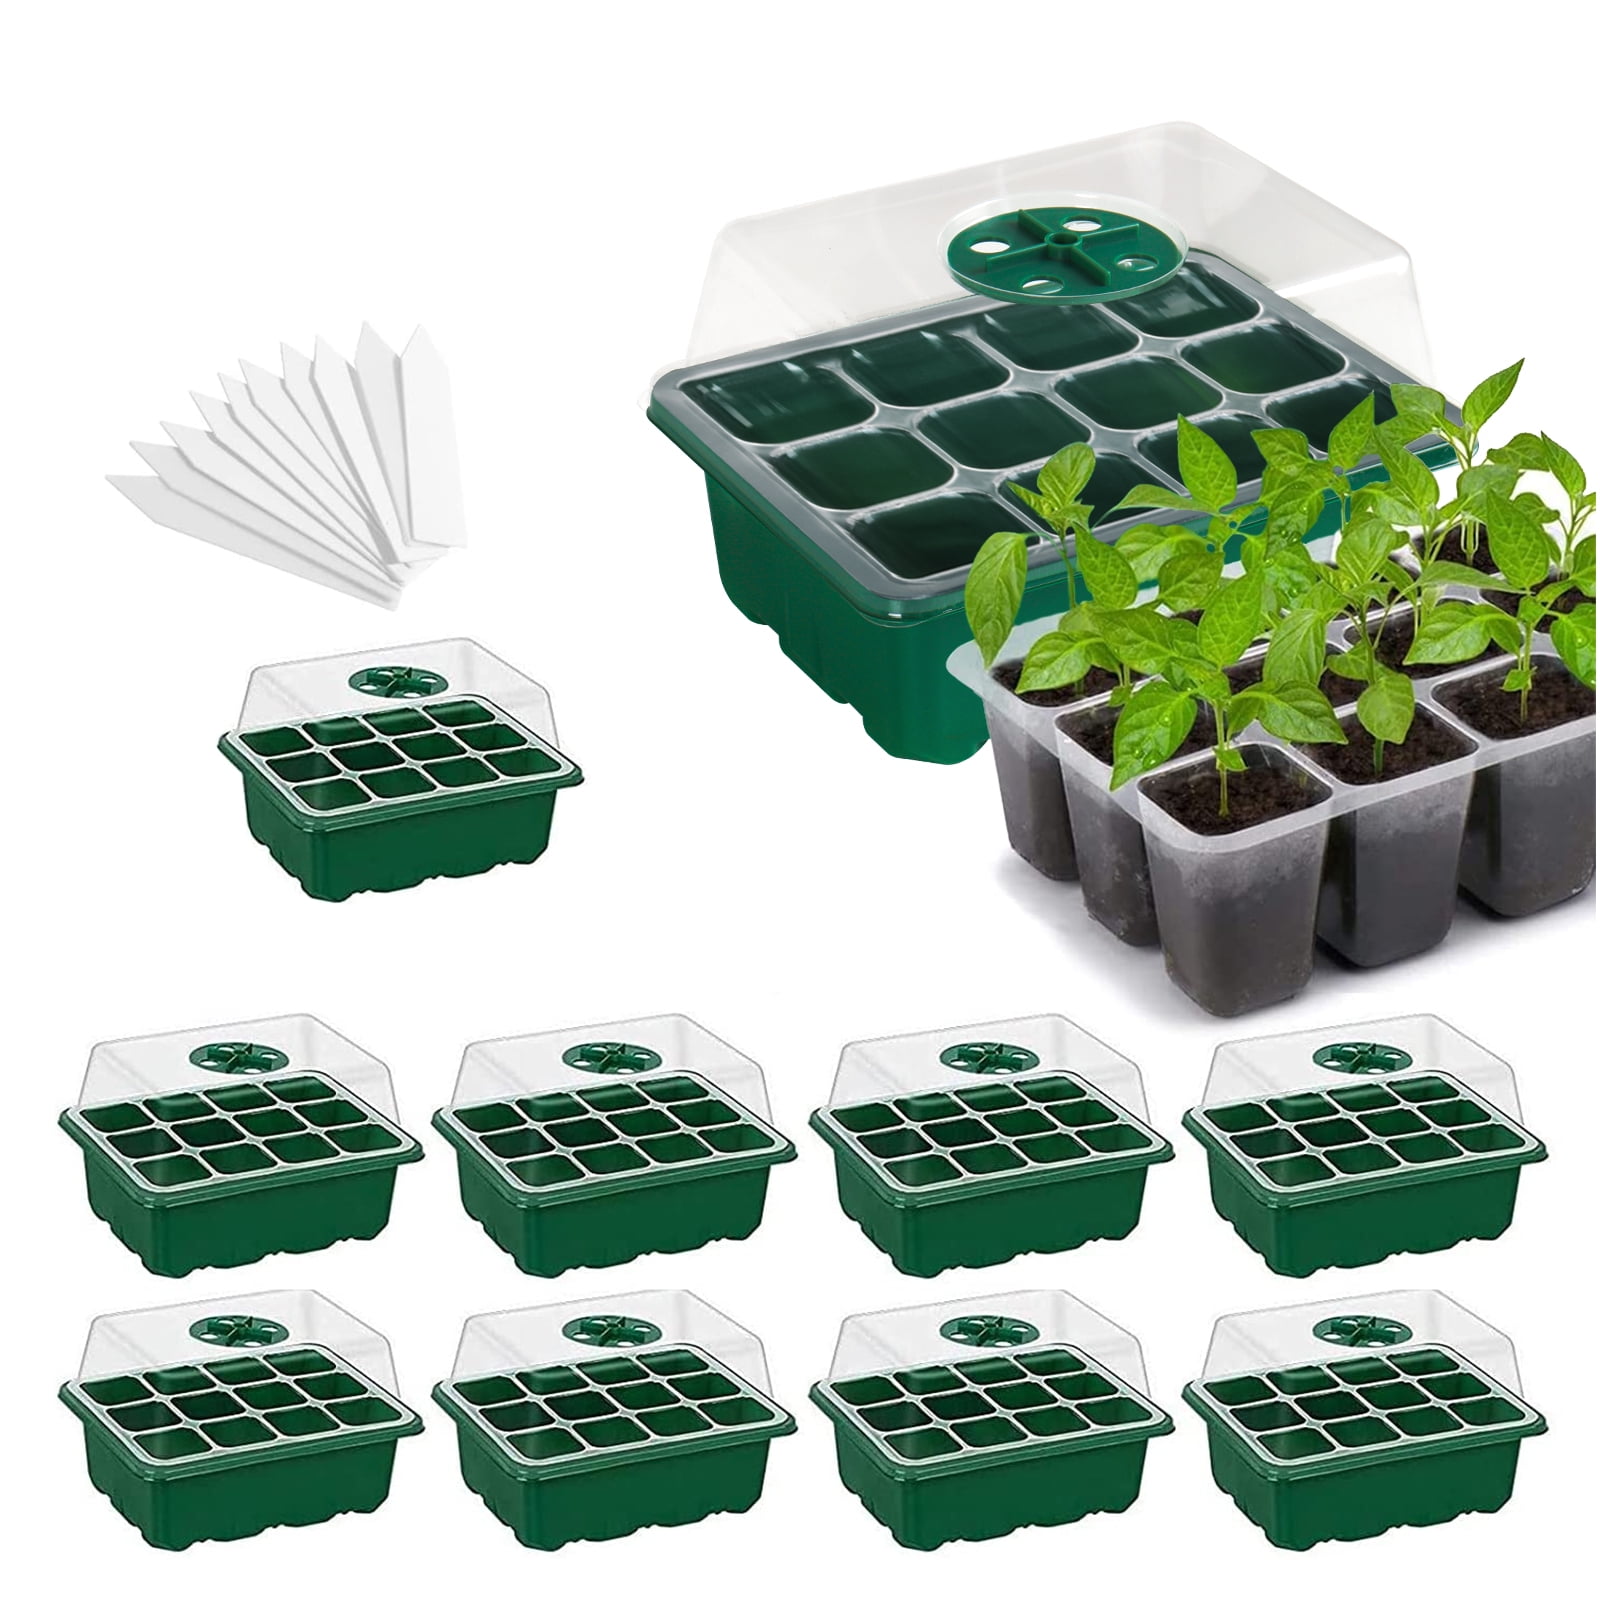 Plant Growing Trays with Humidity Domes Seed Starter Tray Plant Germination Kit Greenhouse Supplies 